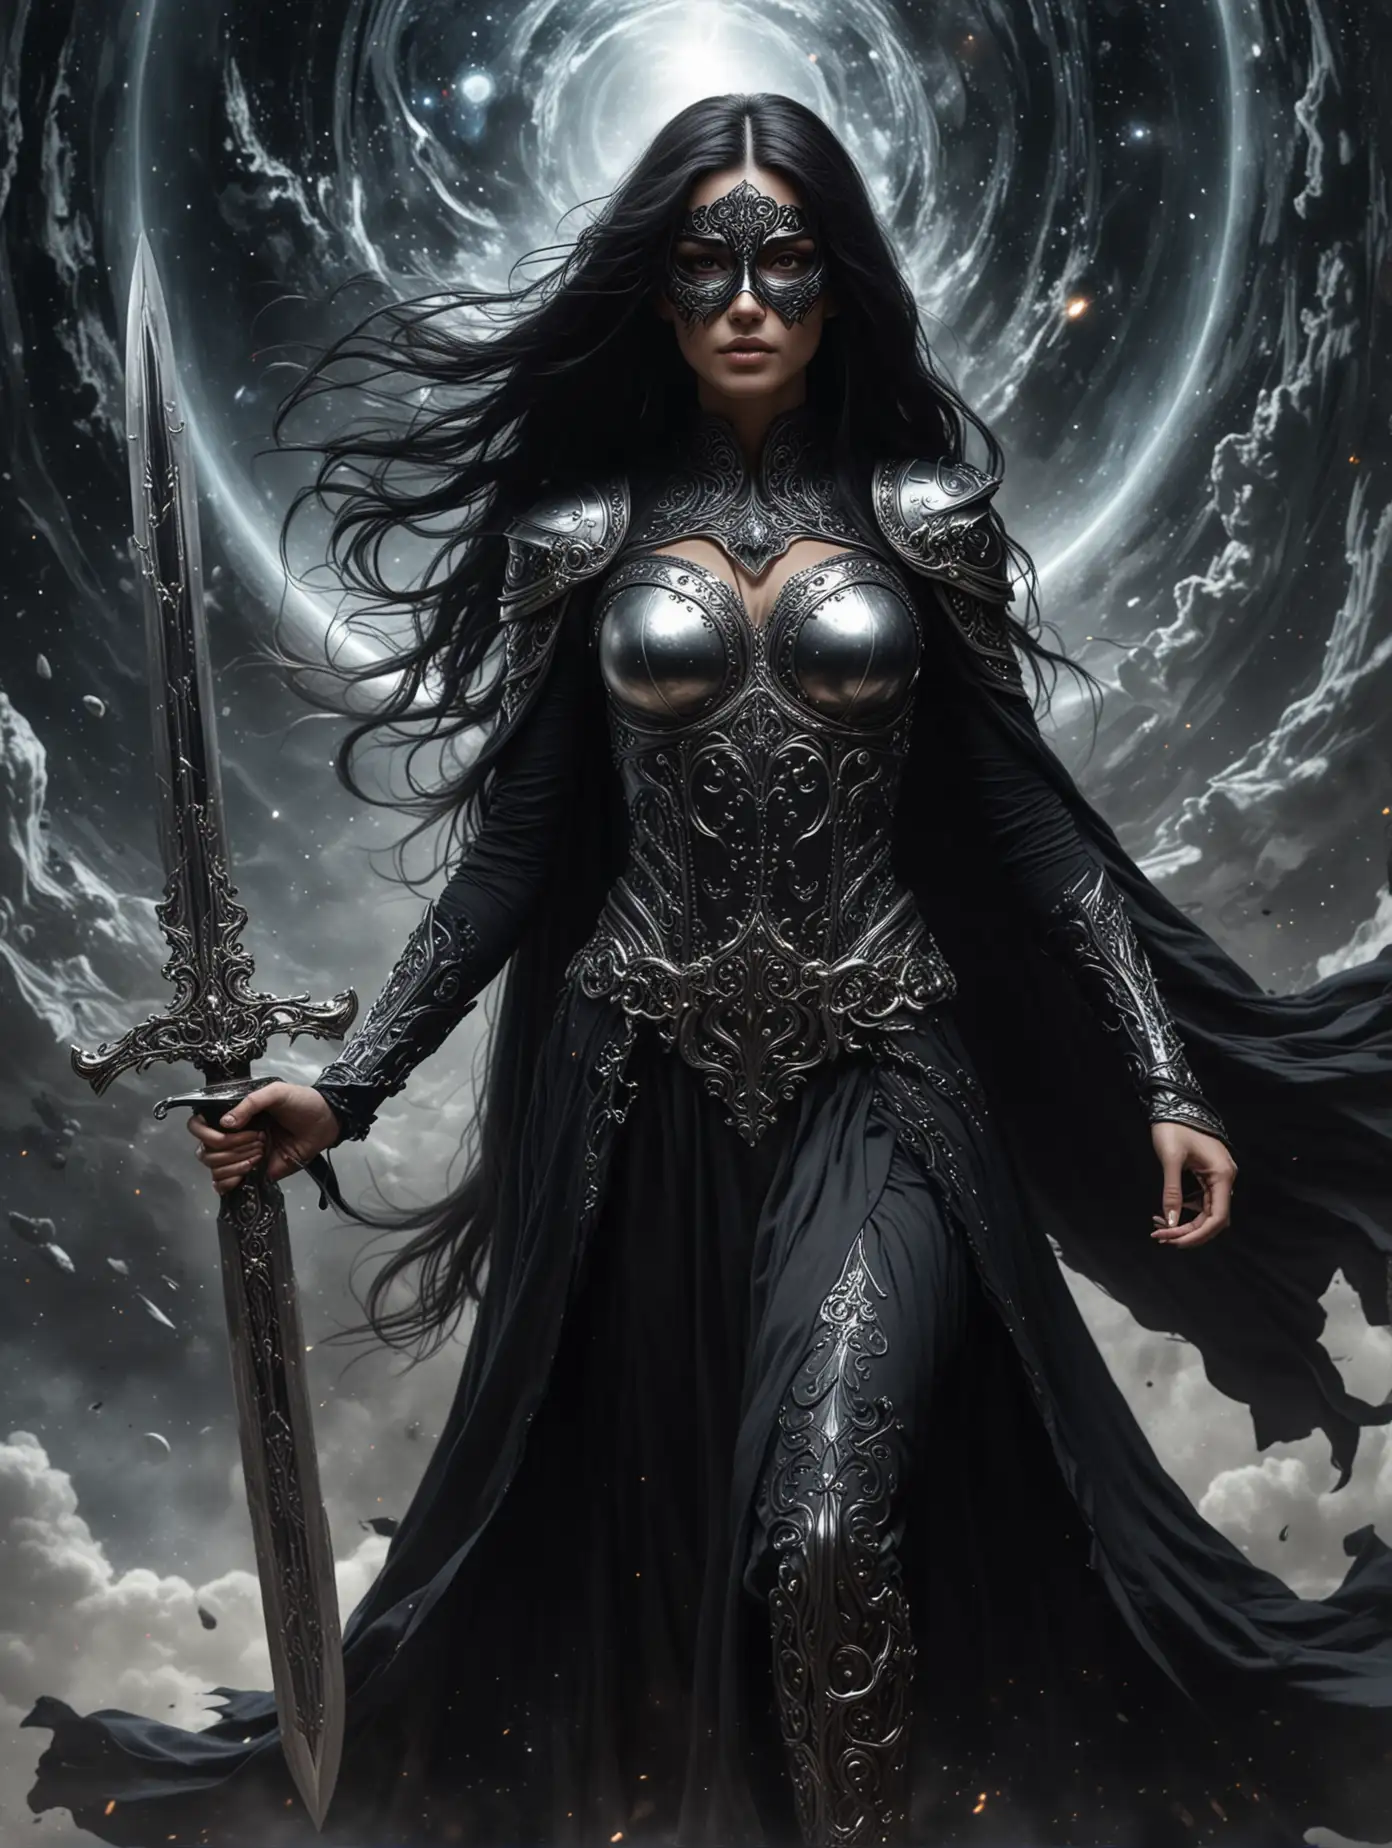 Dark-Priestess-Warrior-Woman-with-Ornate-Mask-and-Sword-in-Space